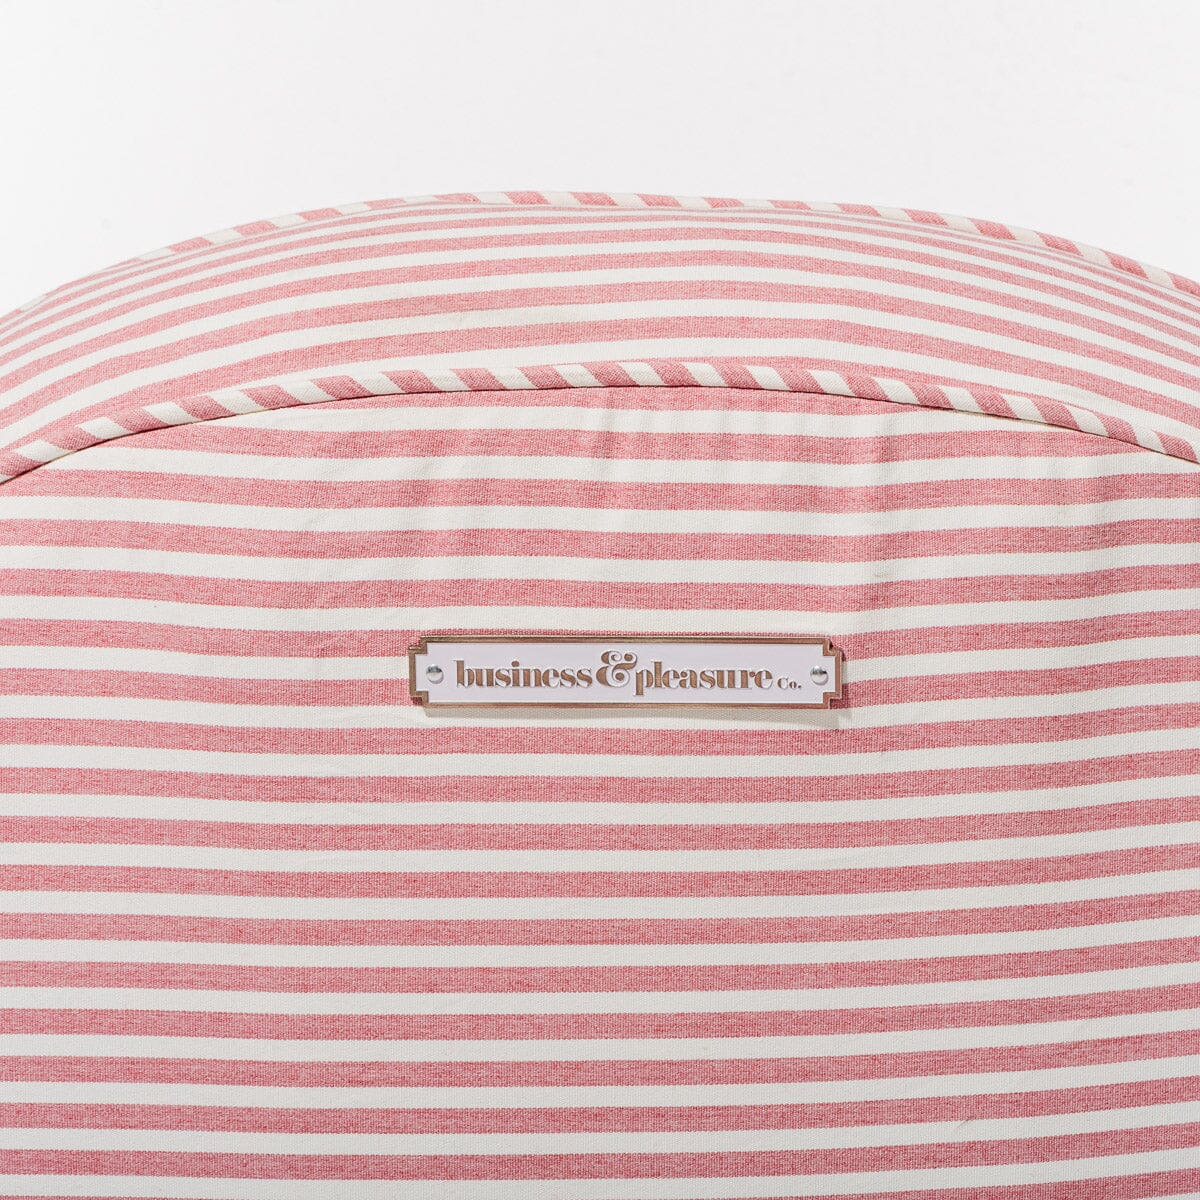 The Pool Lounger - Lauren's Pink Stripe Pool Lounger Business & Pleasure Co 